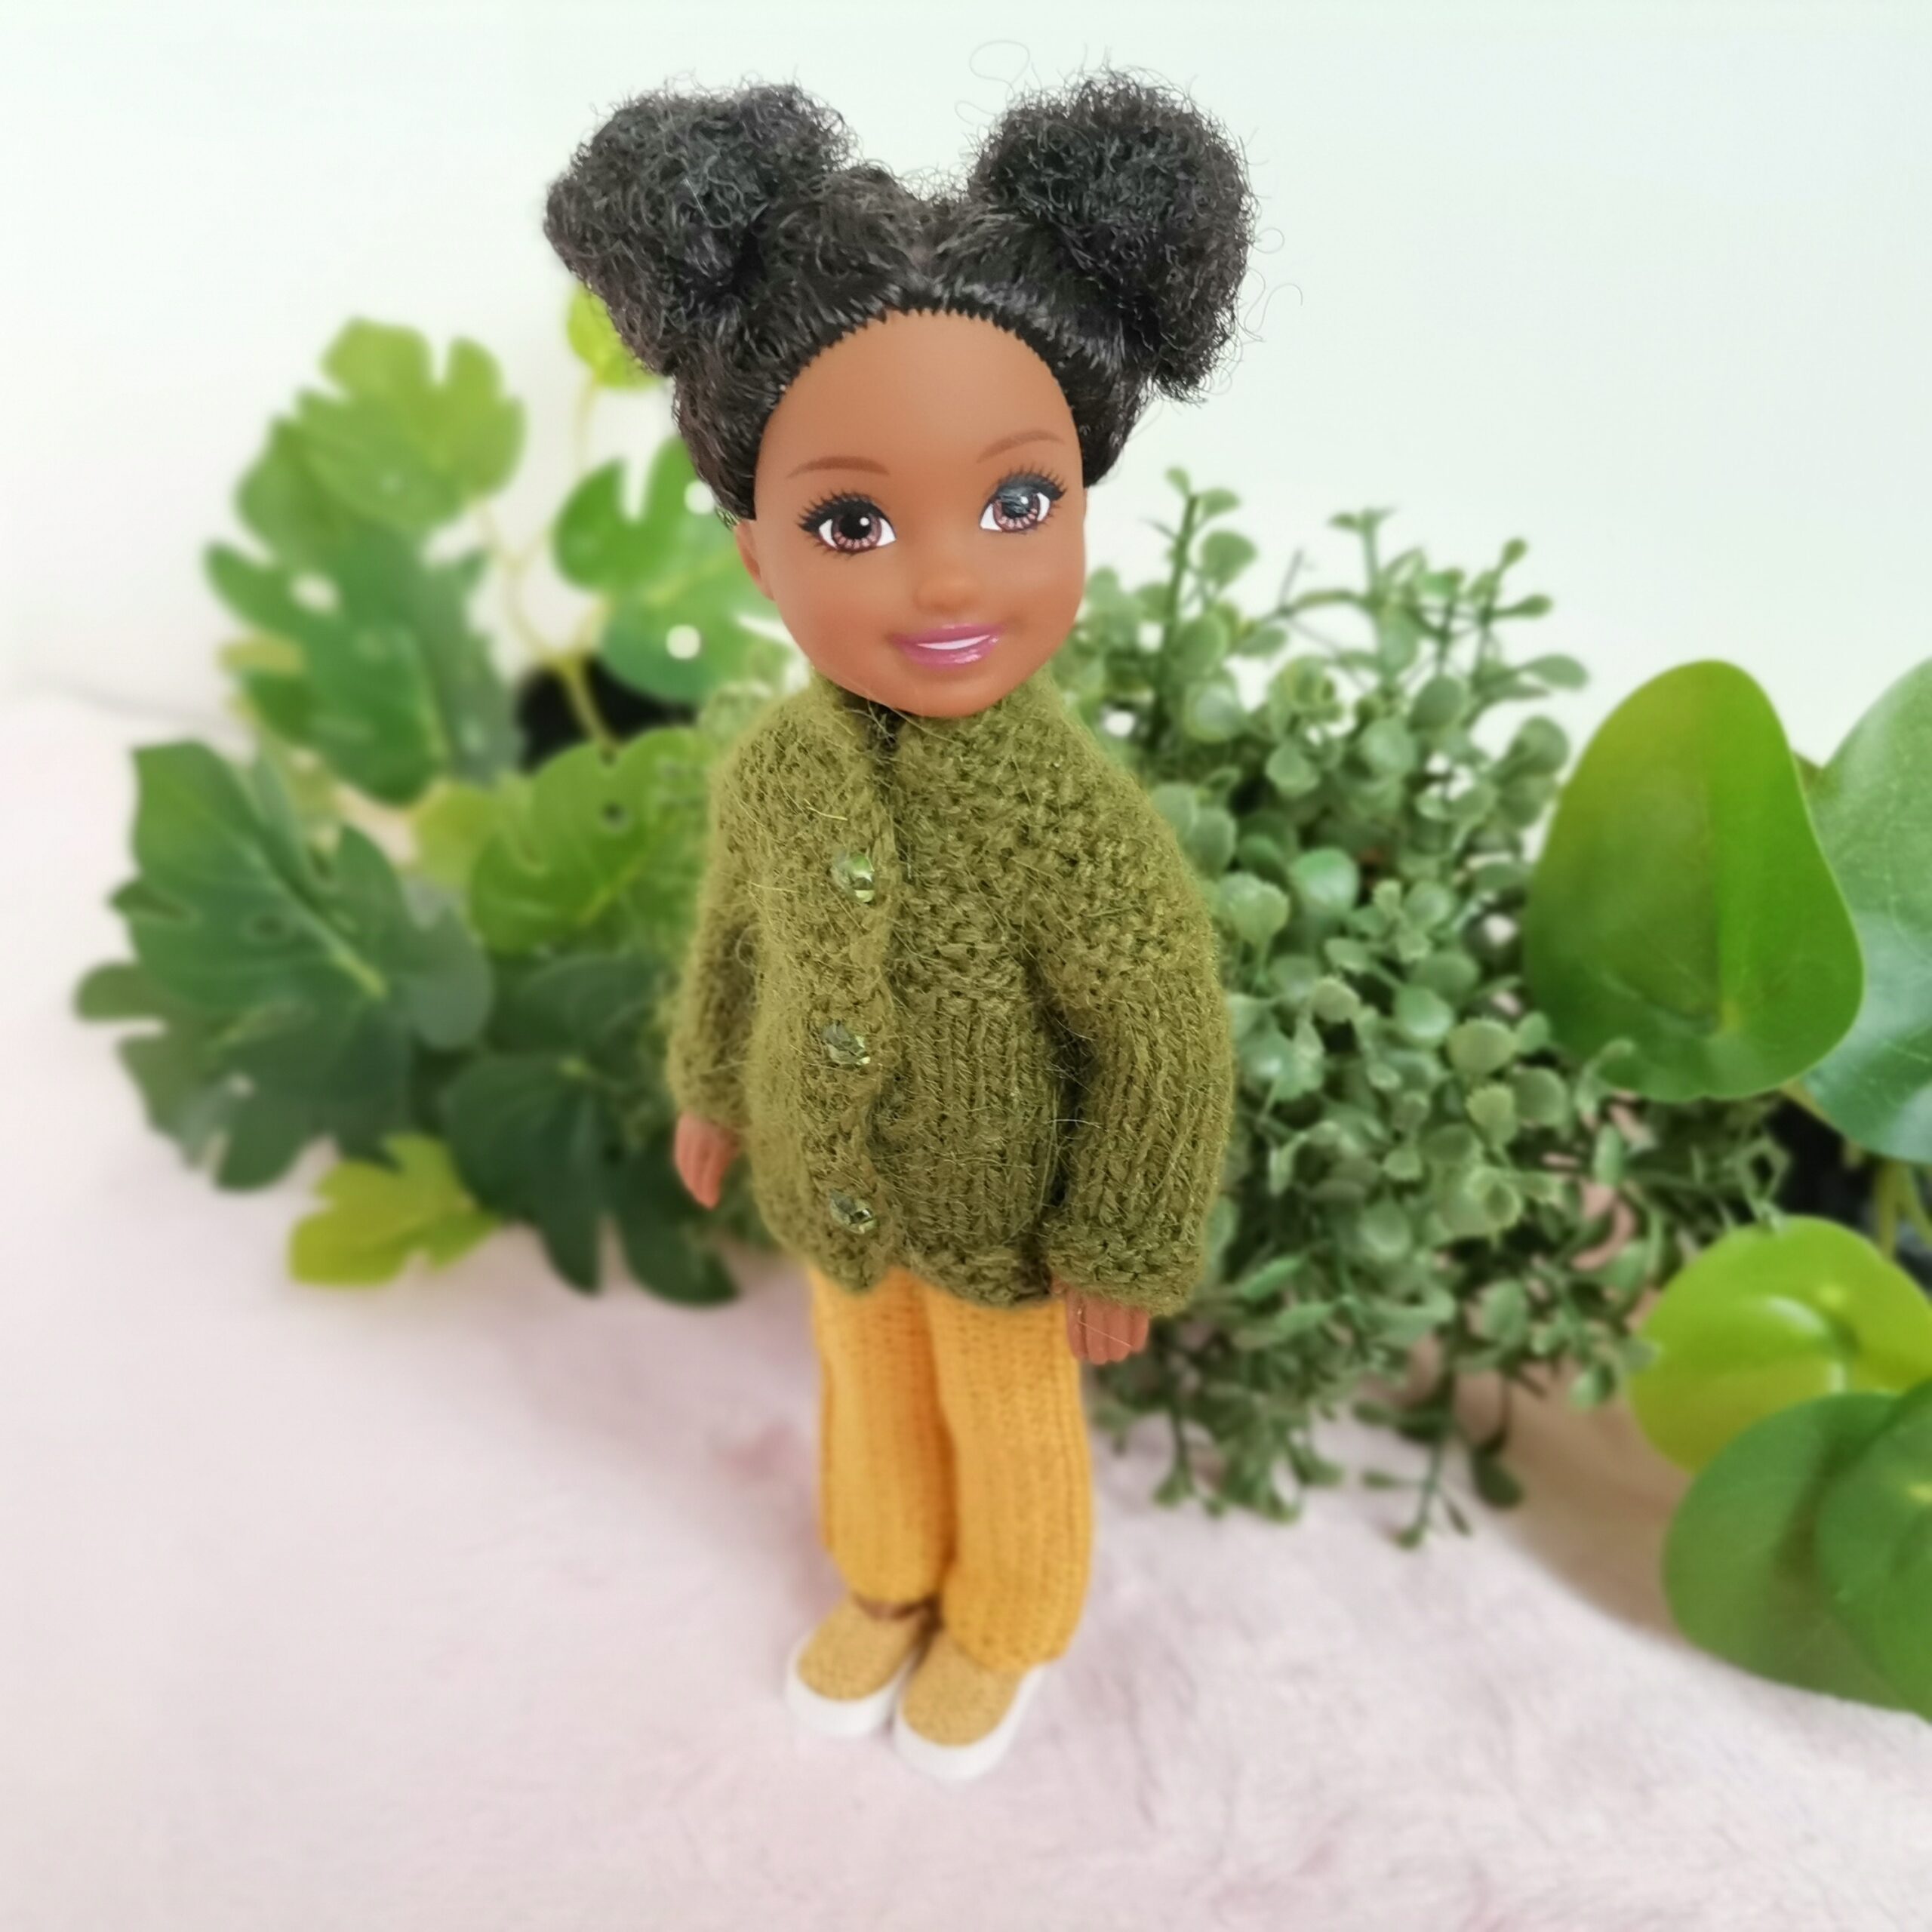 Sweater, pants, and shoes for Chelsea Barbie Doll